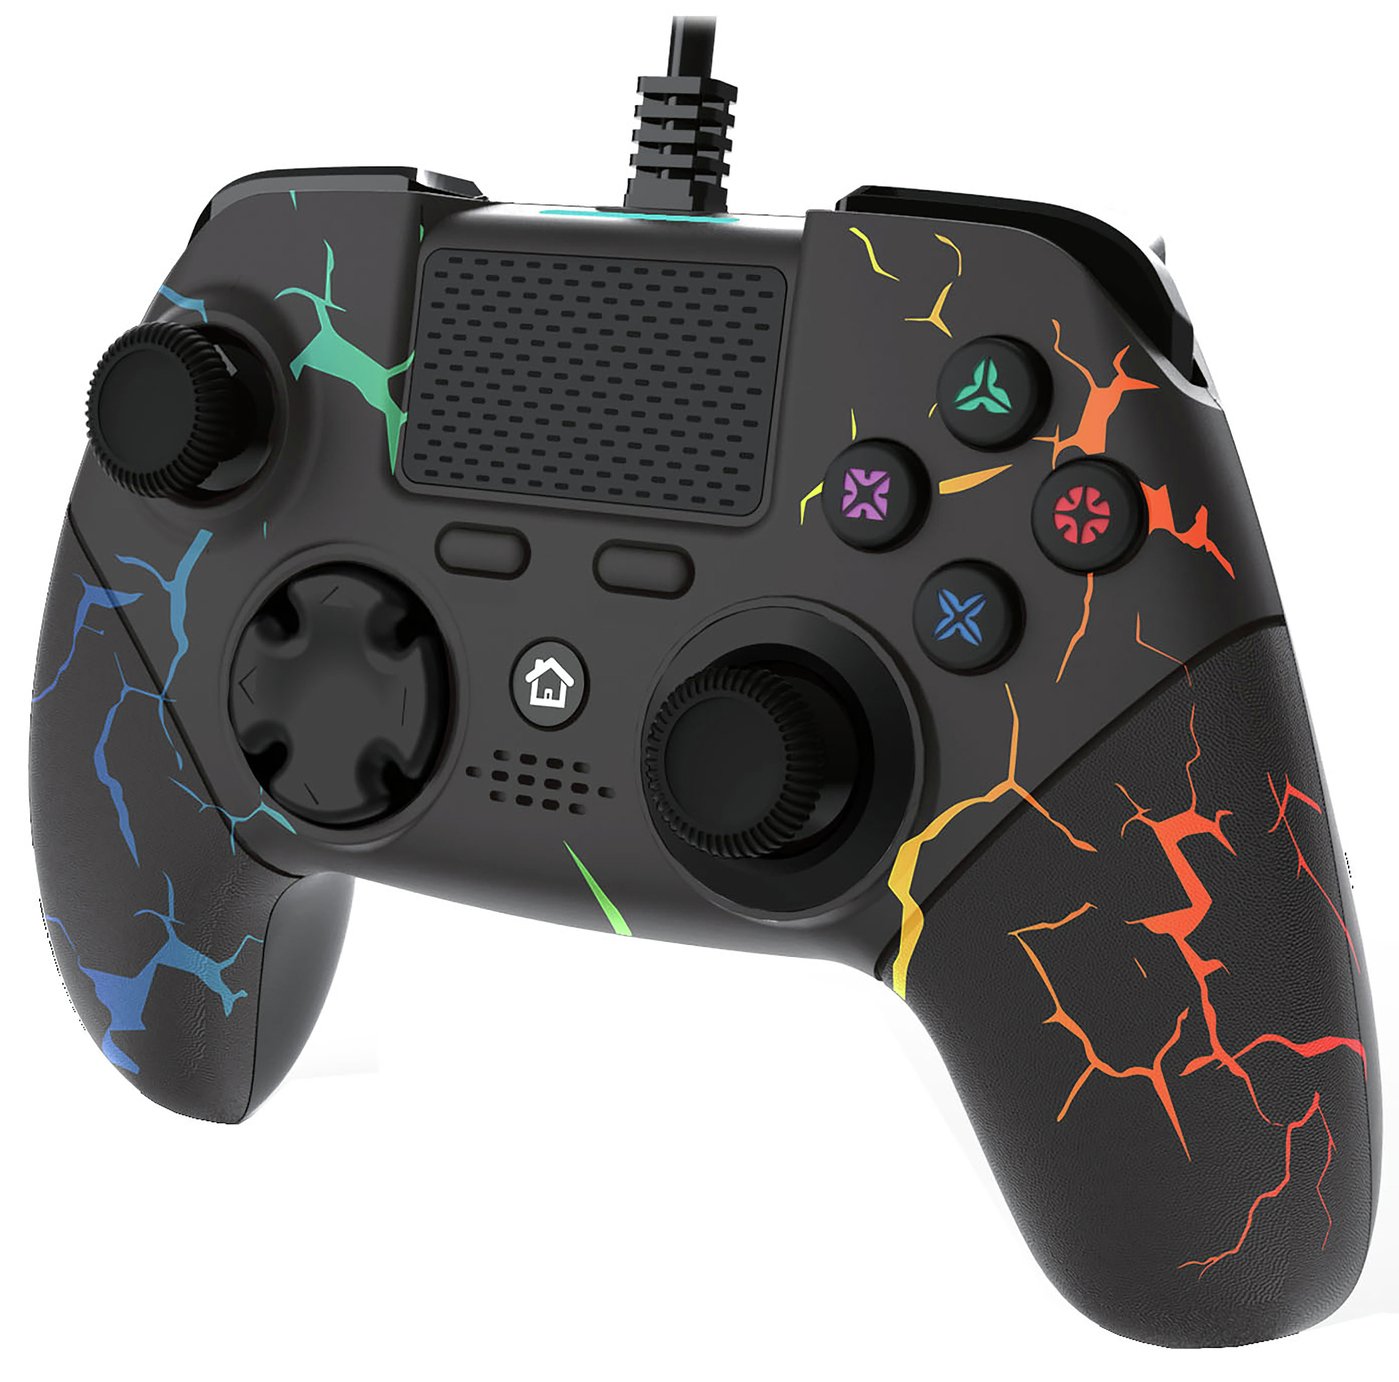 ps4 wired controller with headphone jack